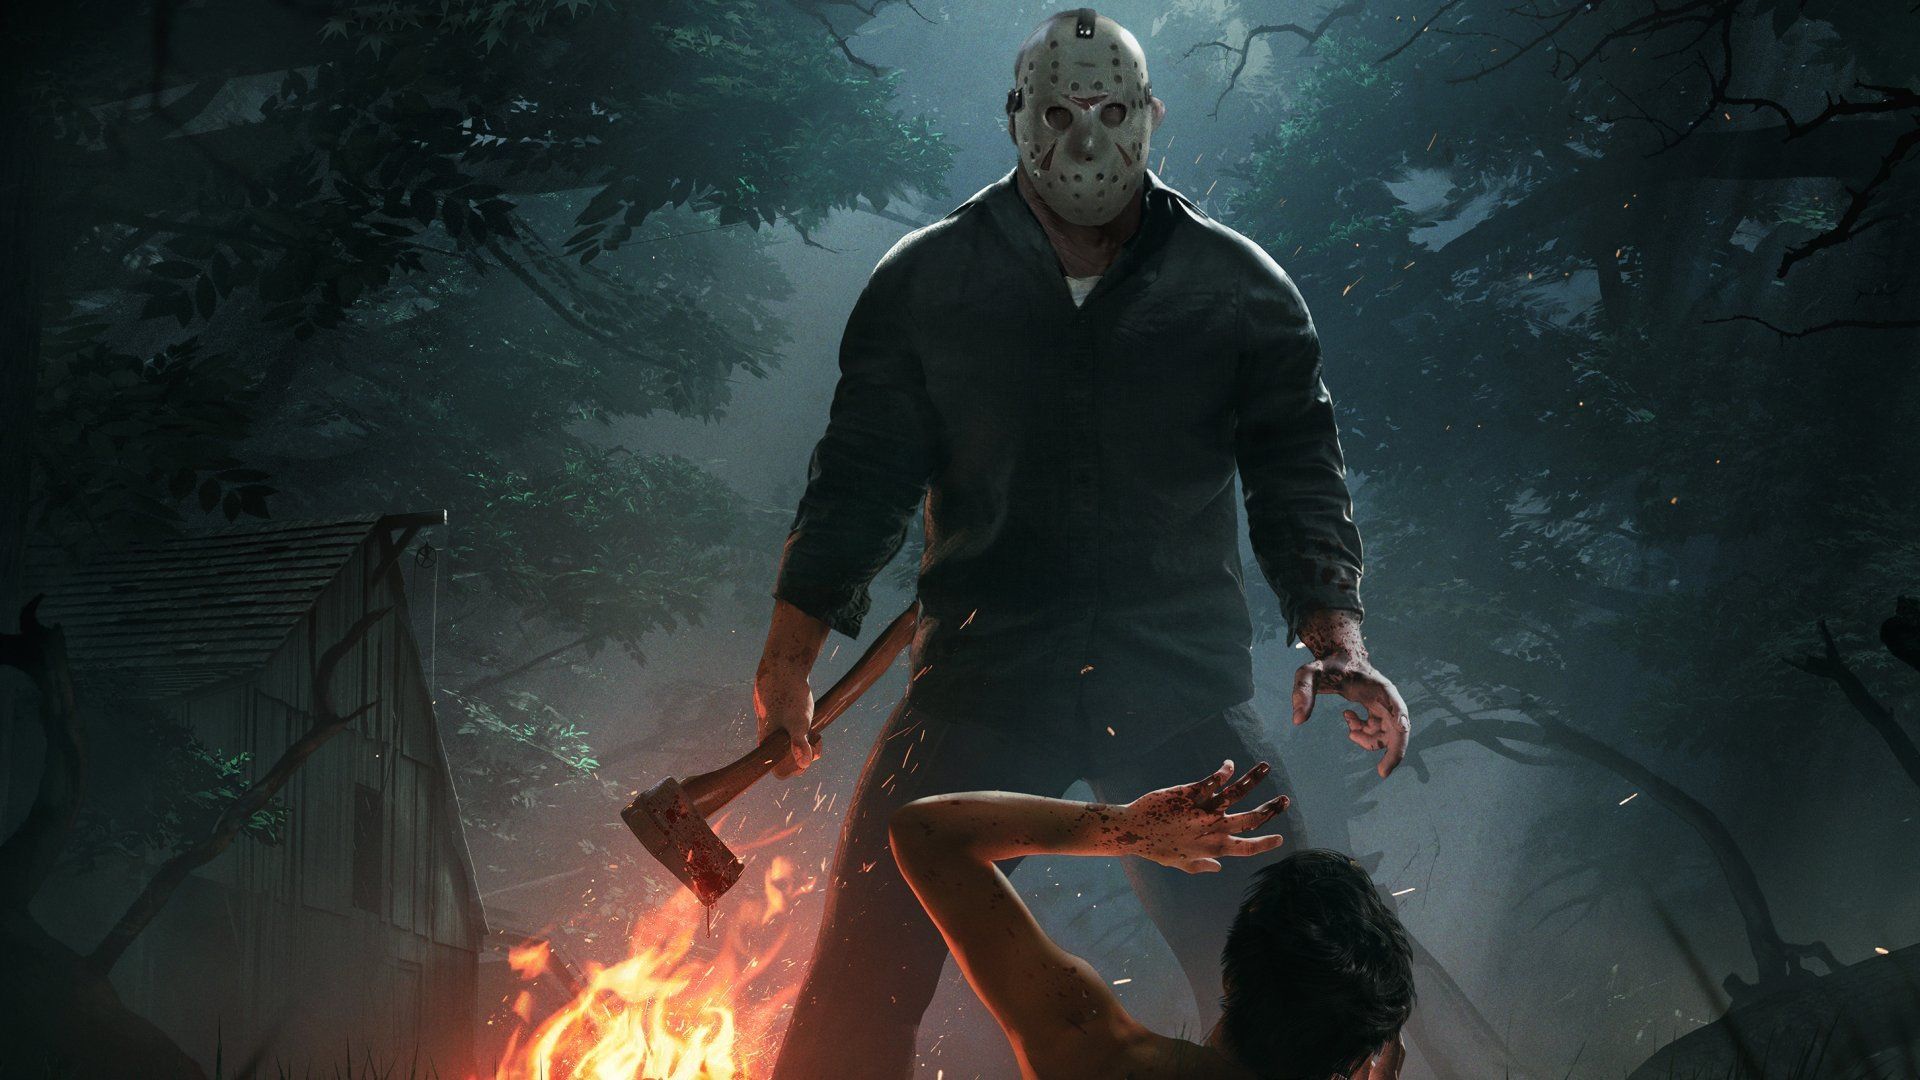 Friday the 13th shutting down dedicated servers this month, just in